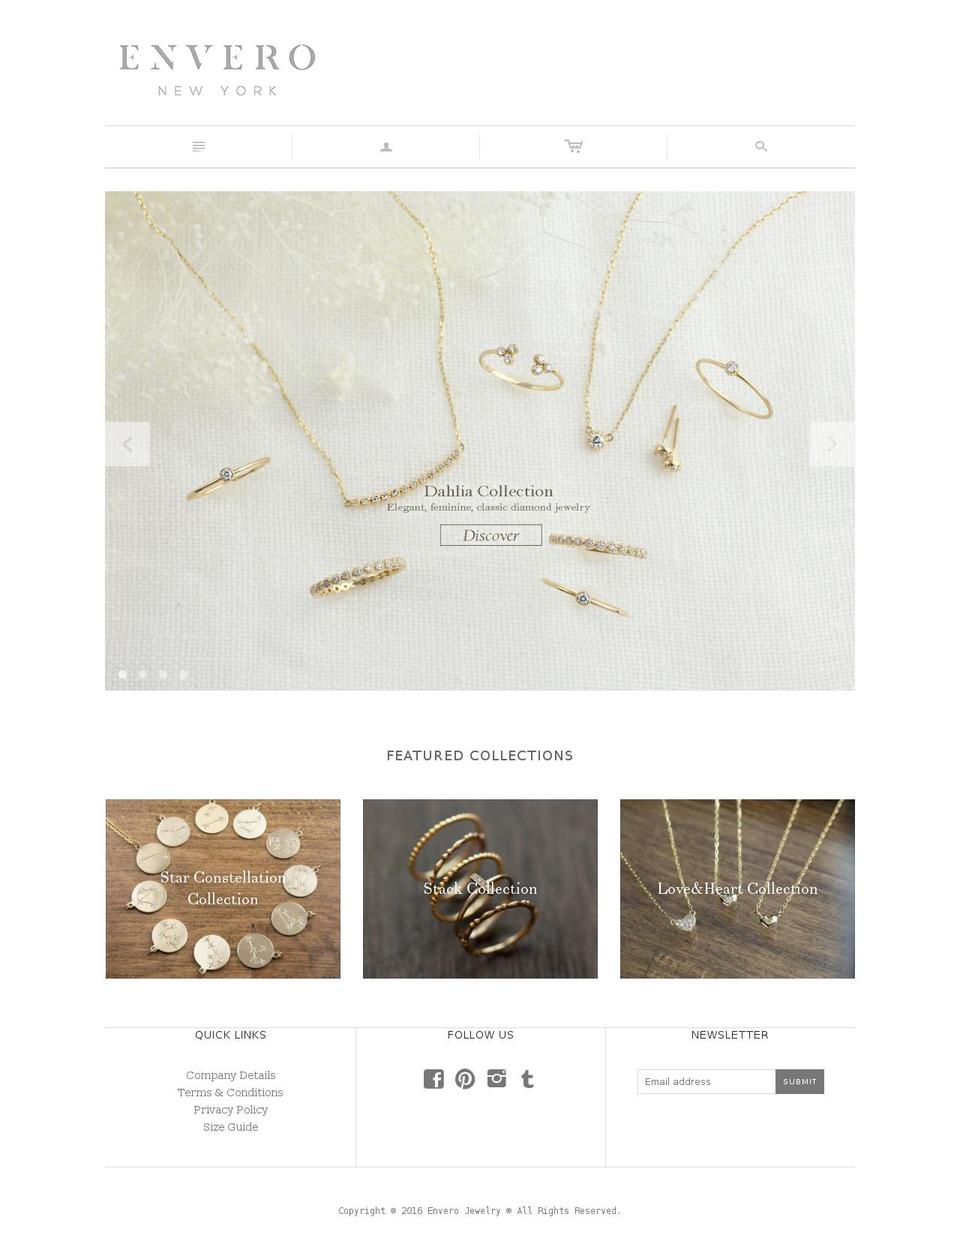 Expression Shopify theme site example enverojewelry.com